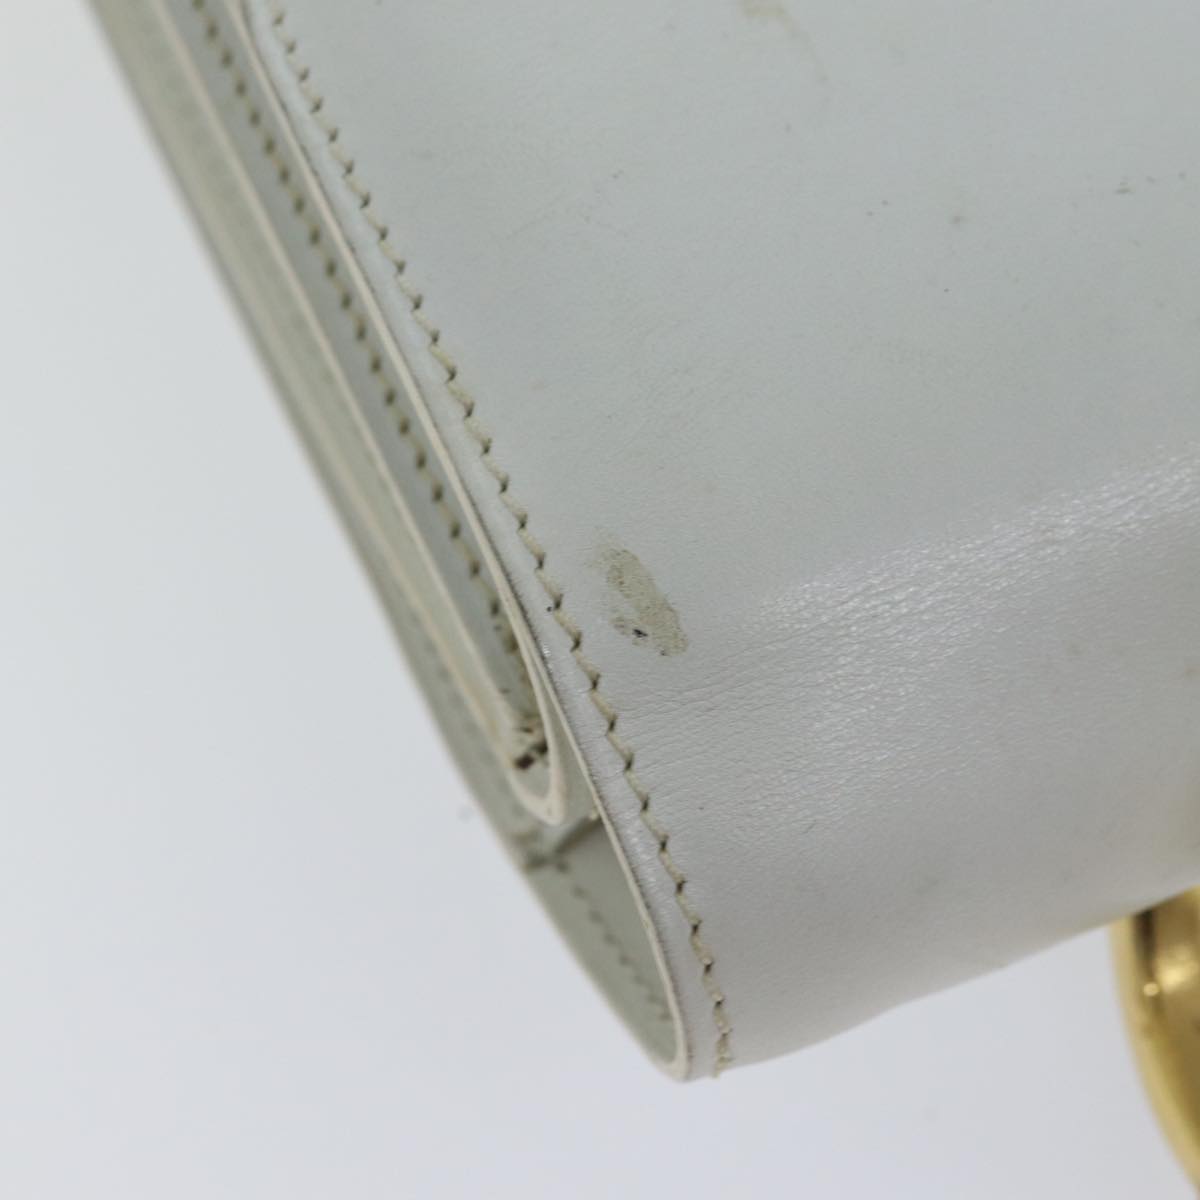 CELINE Hand Bag Leather White Auth 71163